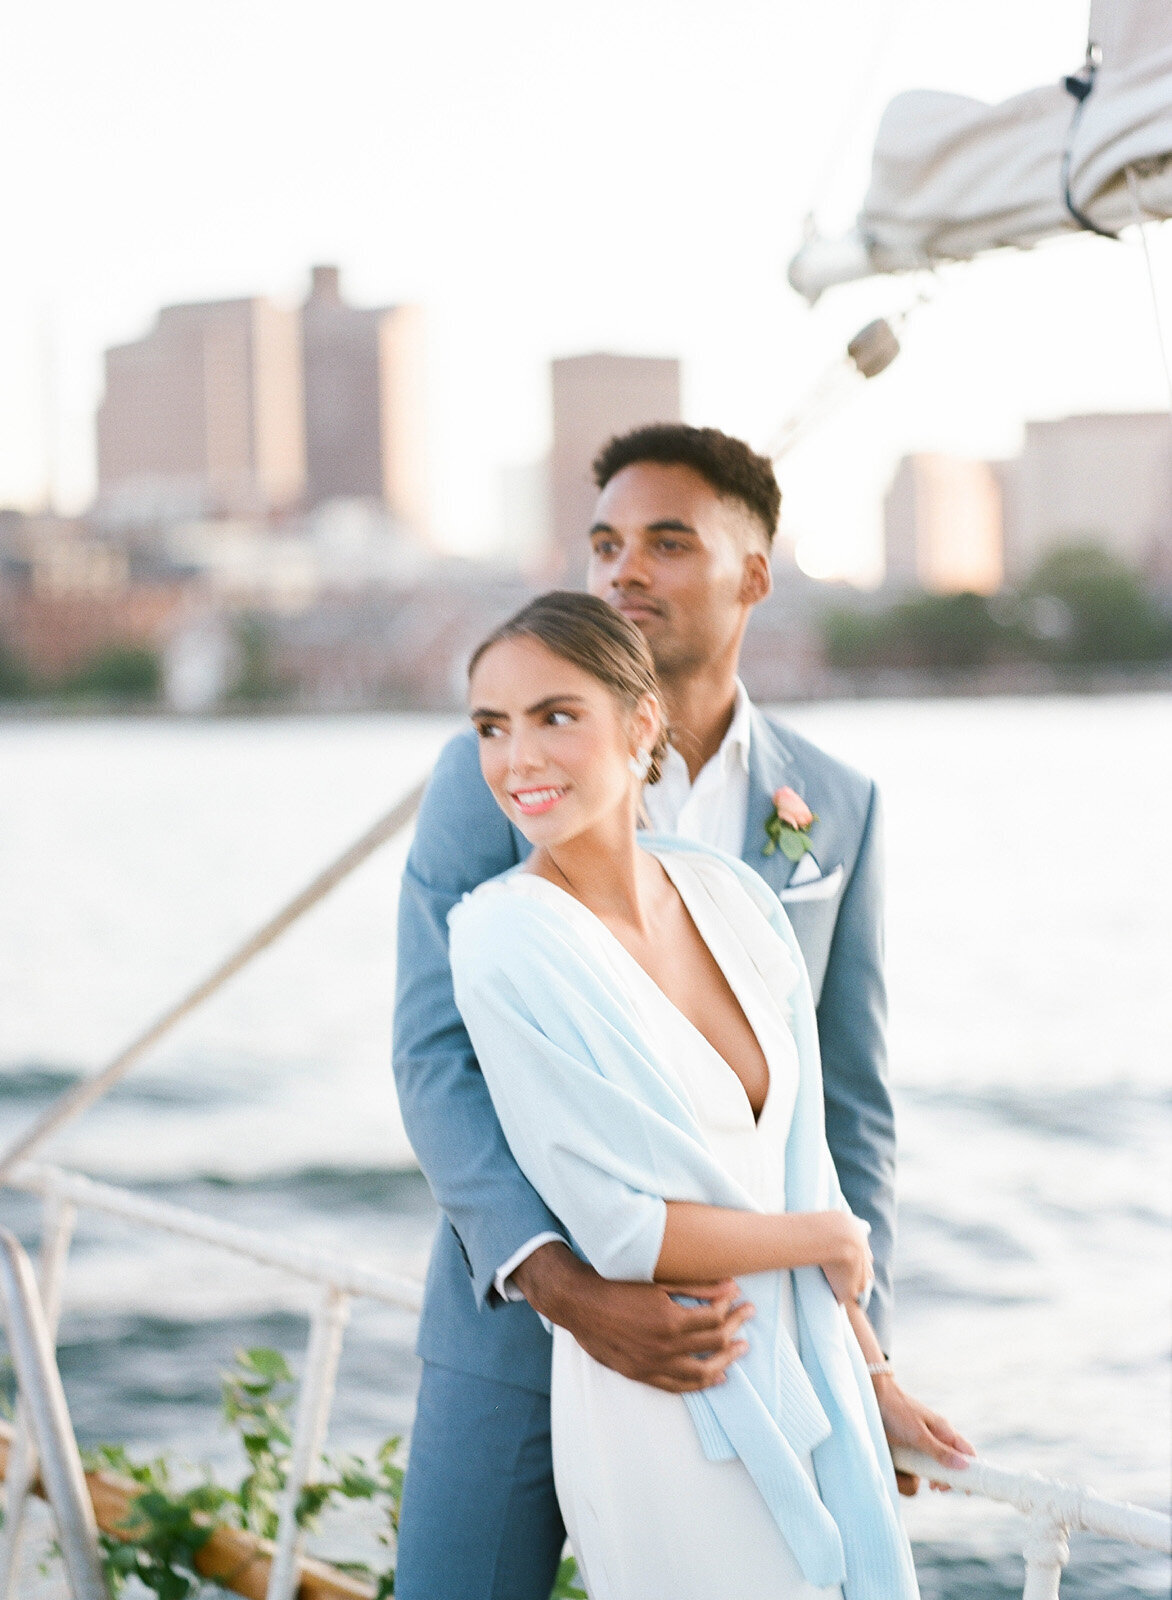 Kate-Murtaugh-Events-elopement-wedding-planner-Boston-Harbor-sailing-sail-boat-yacht-greenery-water-city-skyline-couple-just-married